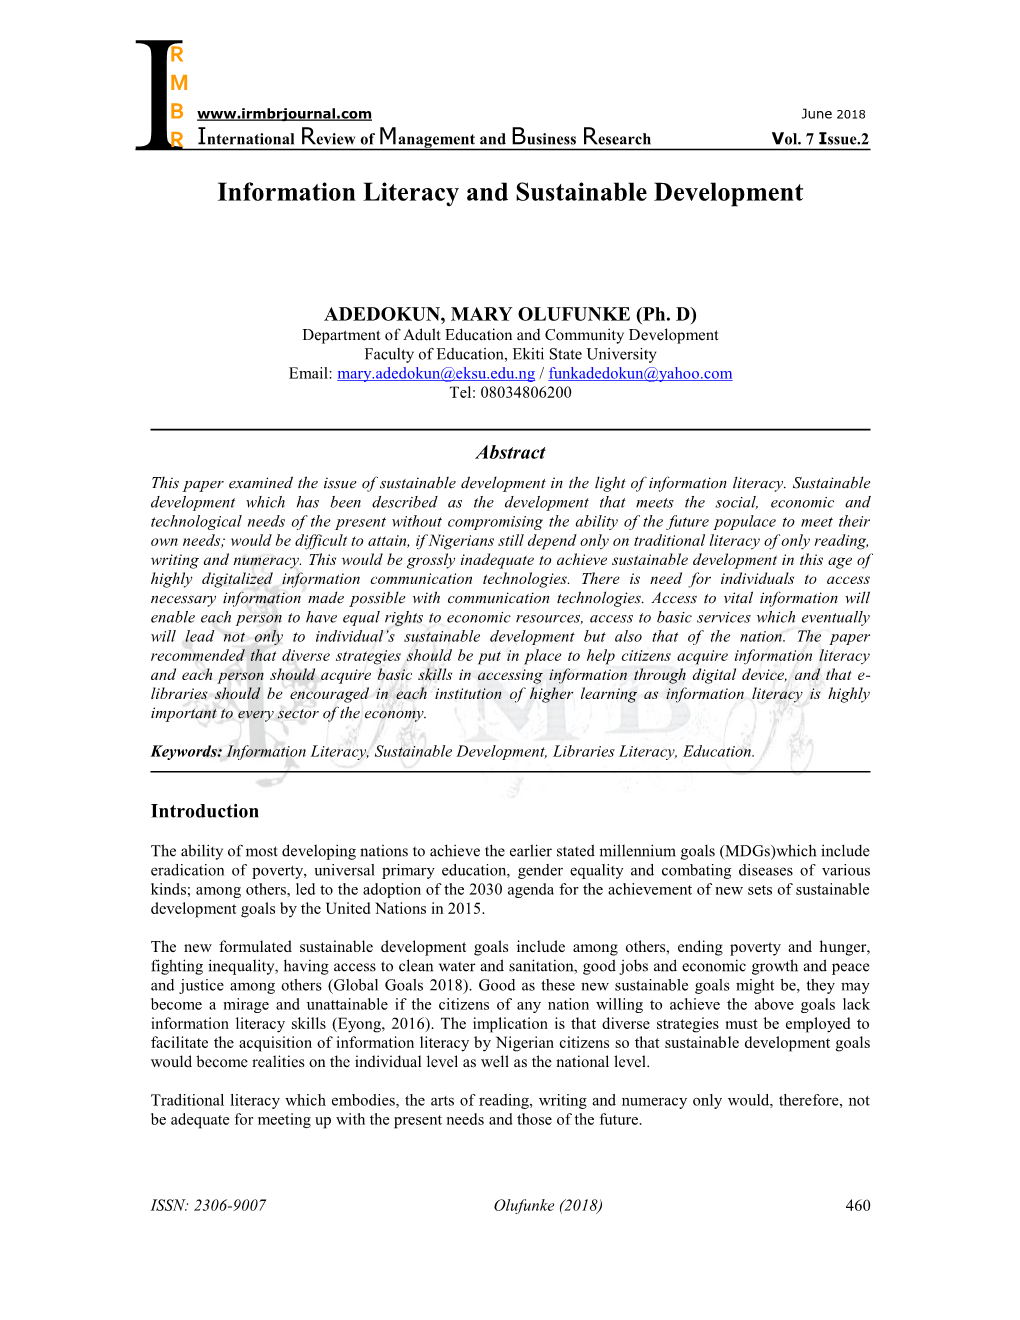 Information Literacy and Sustainable Development